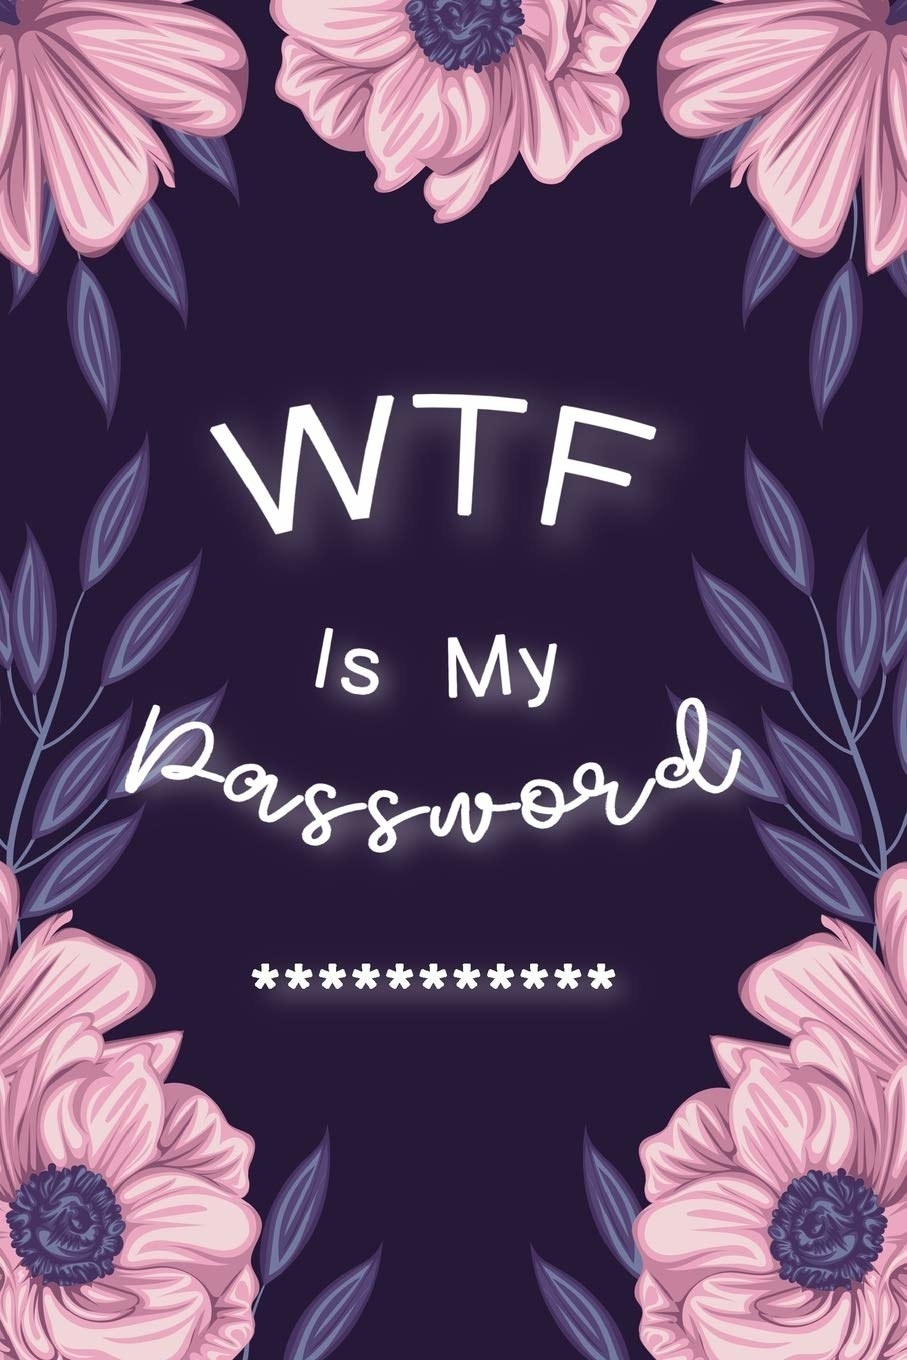 The cover of a journal that says WTF is my password